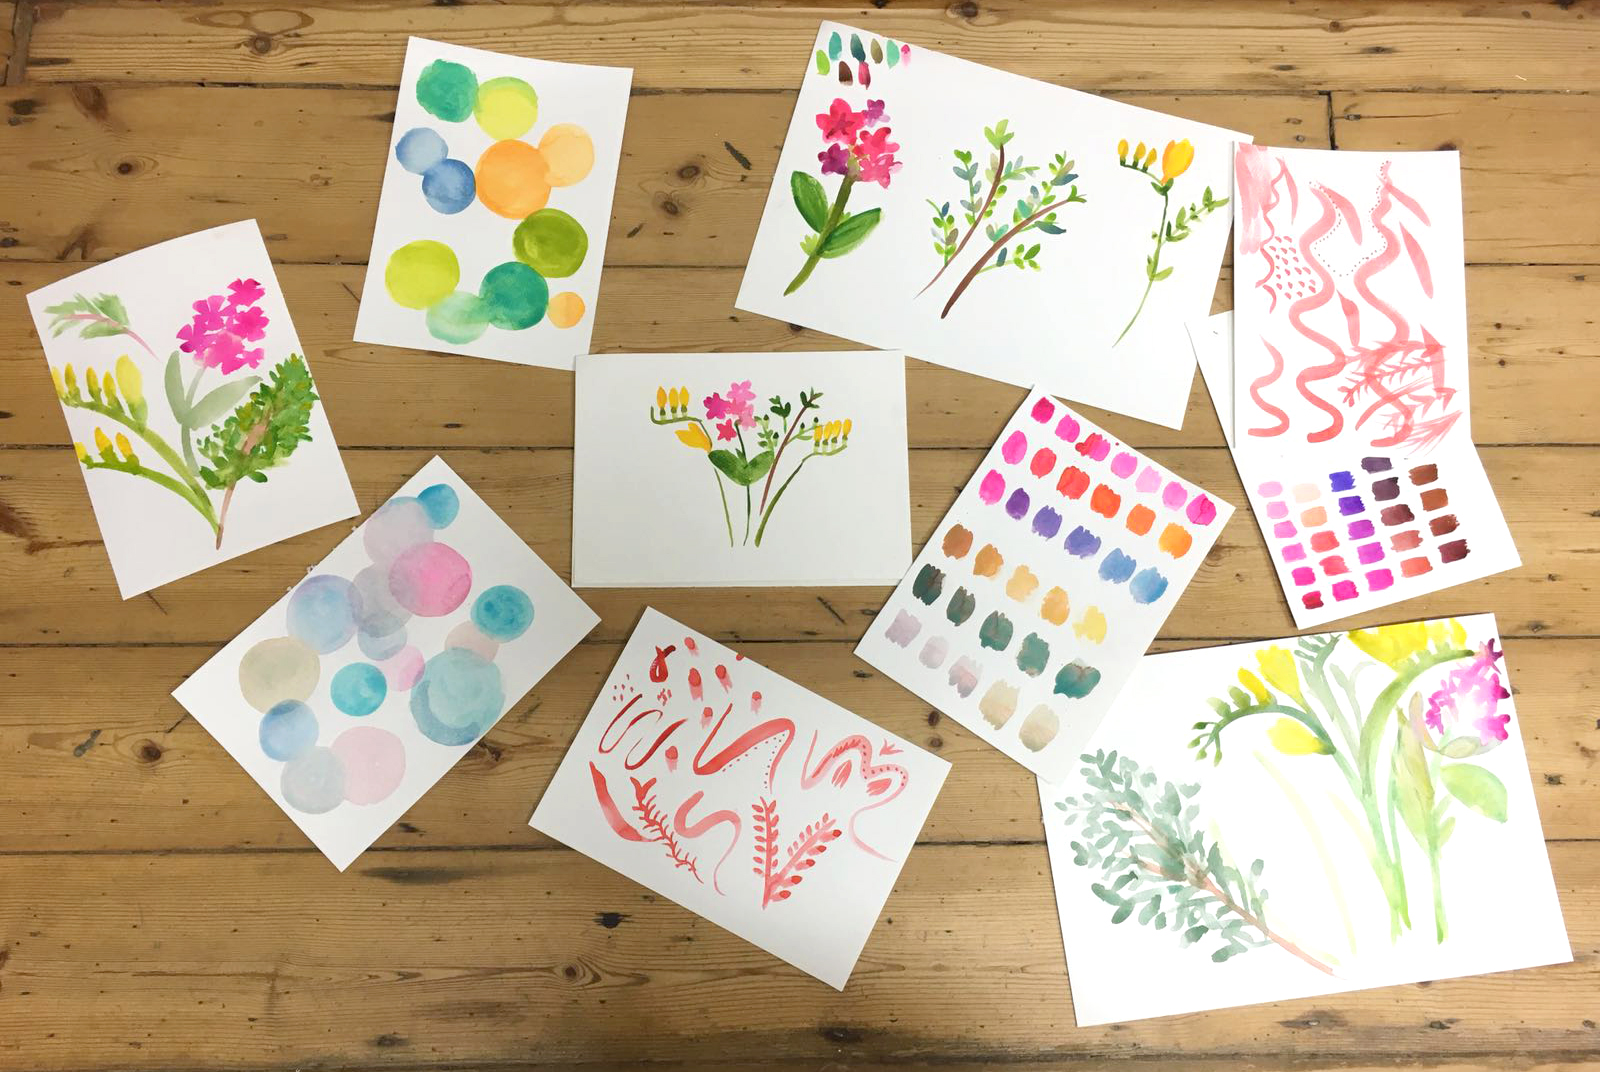 Watercolour Workshop Tea and Crafting London